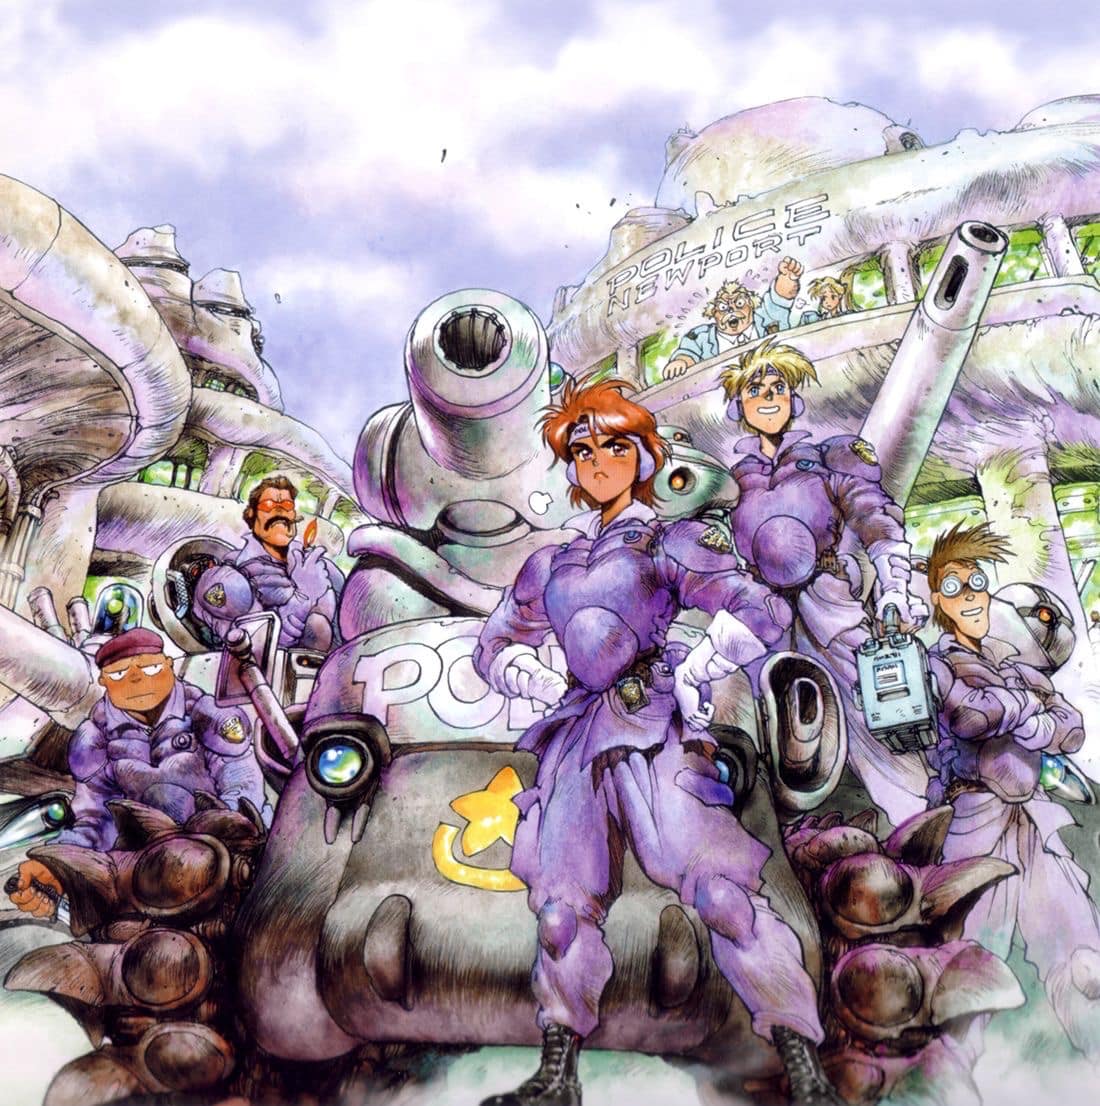 1990s_(style) 2girls 5boys al'cu_ad_solte artist_self-insert belt body_armor bonaparte_(tank) boots bulletproof_vest cannon character_request cigar cityscape cloud concept_art cyberpunk damaged dirty dominion_(manga) emblem english_text facial_hair glasses gloves goggles hat headgear leona_ozaki light lighter machinery manly military_vehicle motor_vehicle multiple_boys multiple_girls mustache new_dominion_tank_police official_art official_style police police_badge police_uniform policeman policewoman production_art promotional_art retro_artstyle scan science_fiction shirow_masamume_(person) shirow_masamune sunglasses swat tactical_clothes tank traditional_media turret uniform